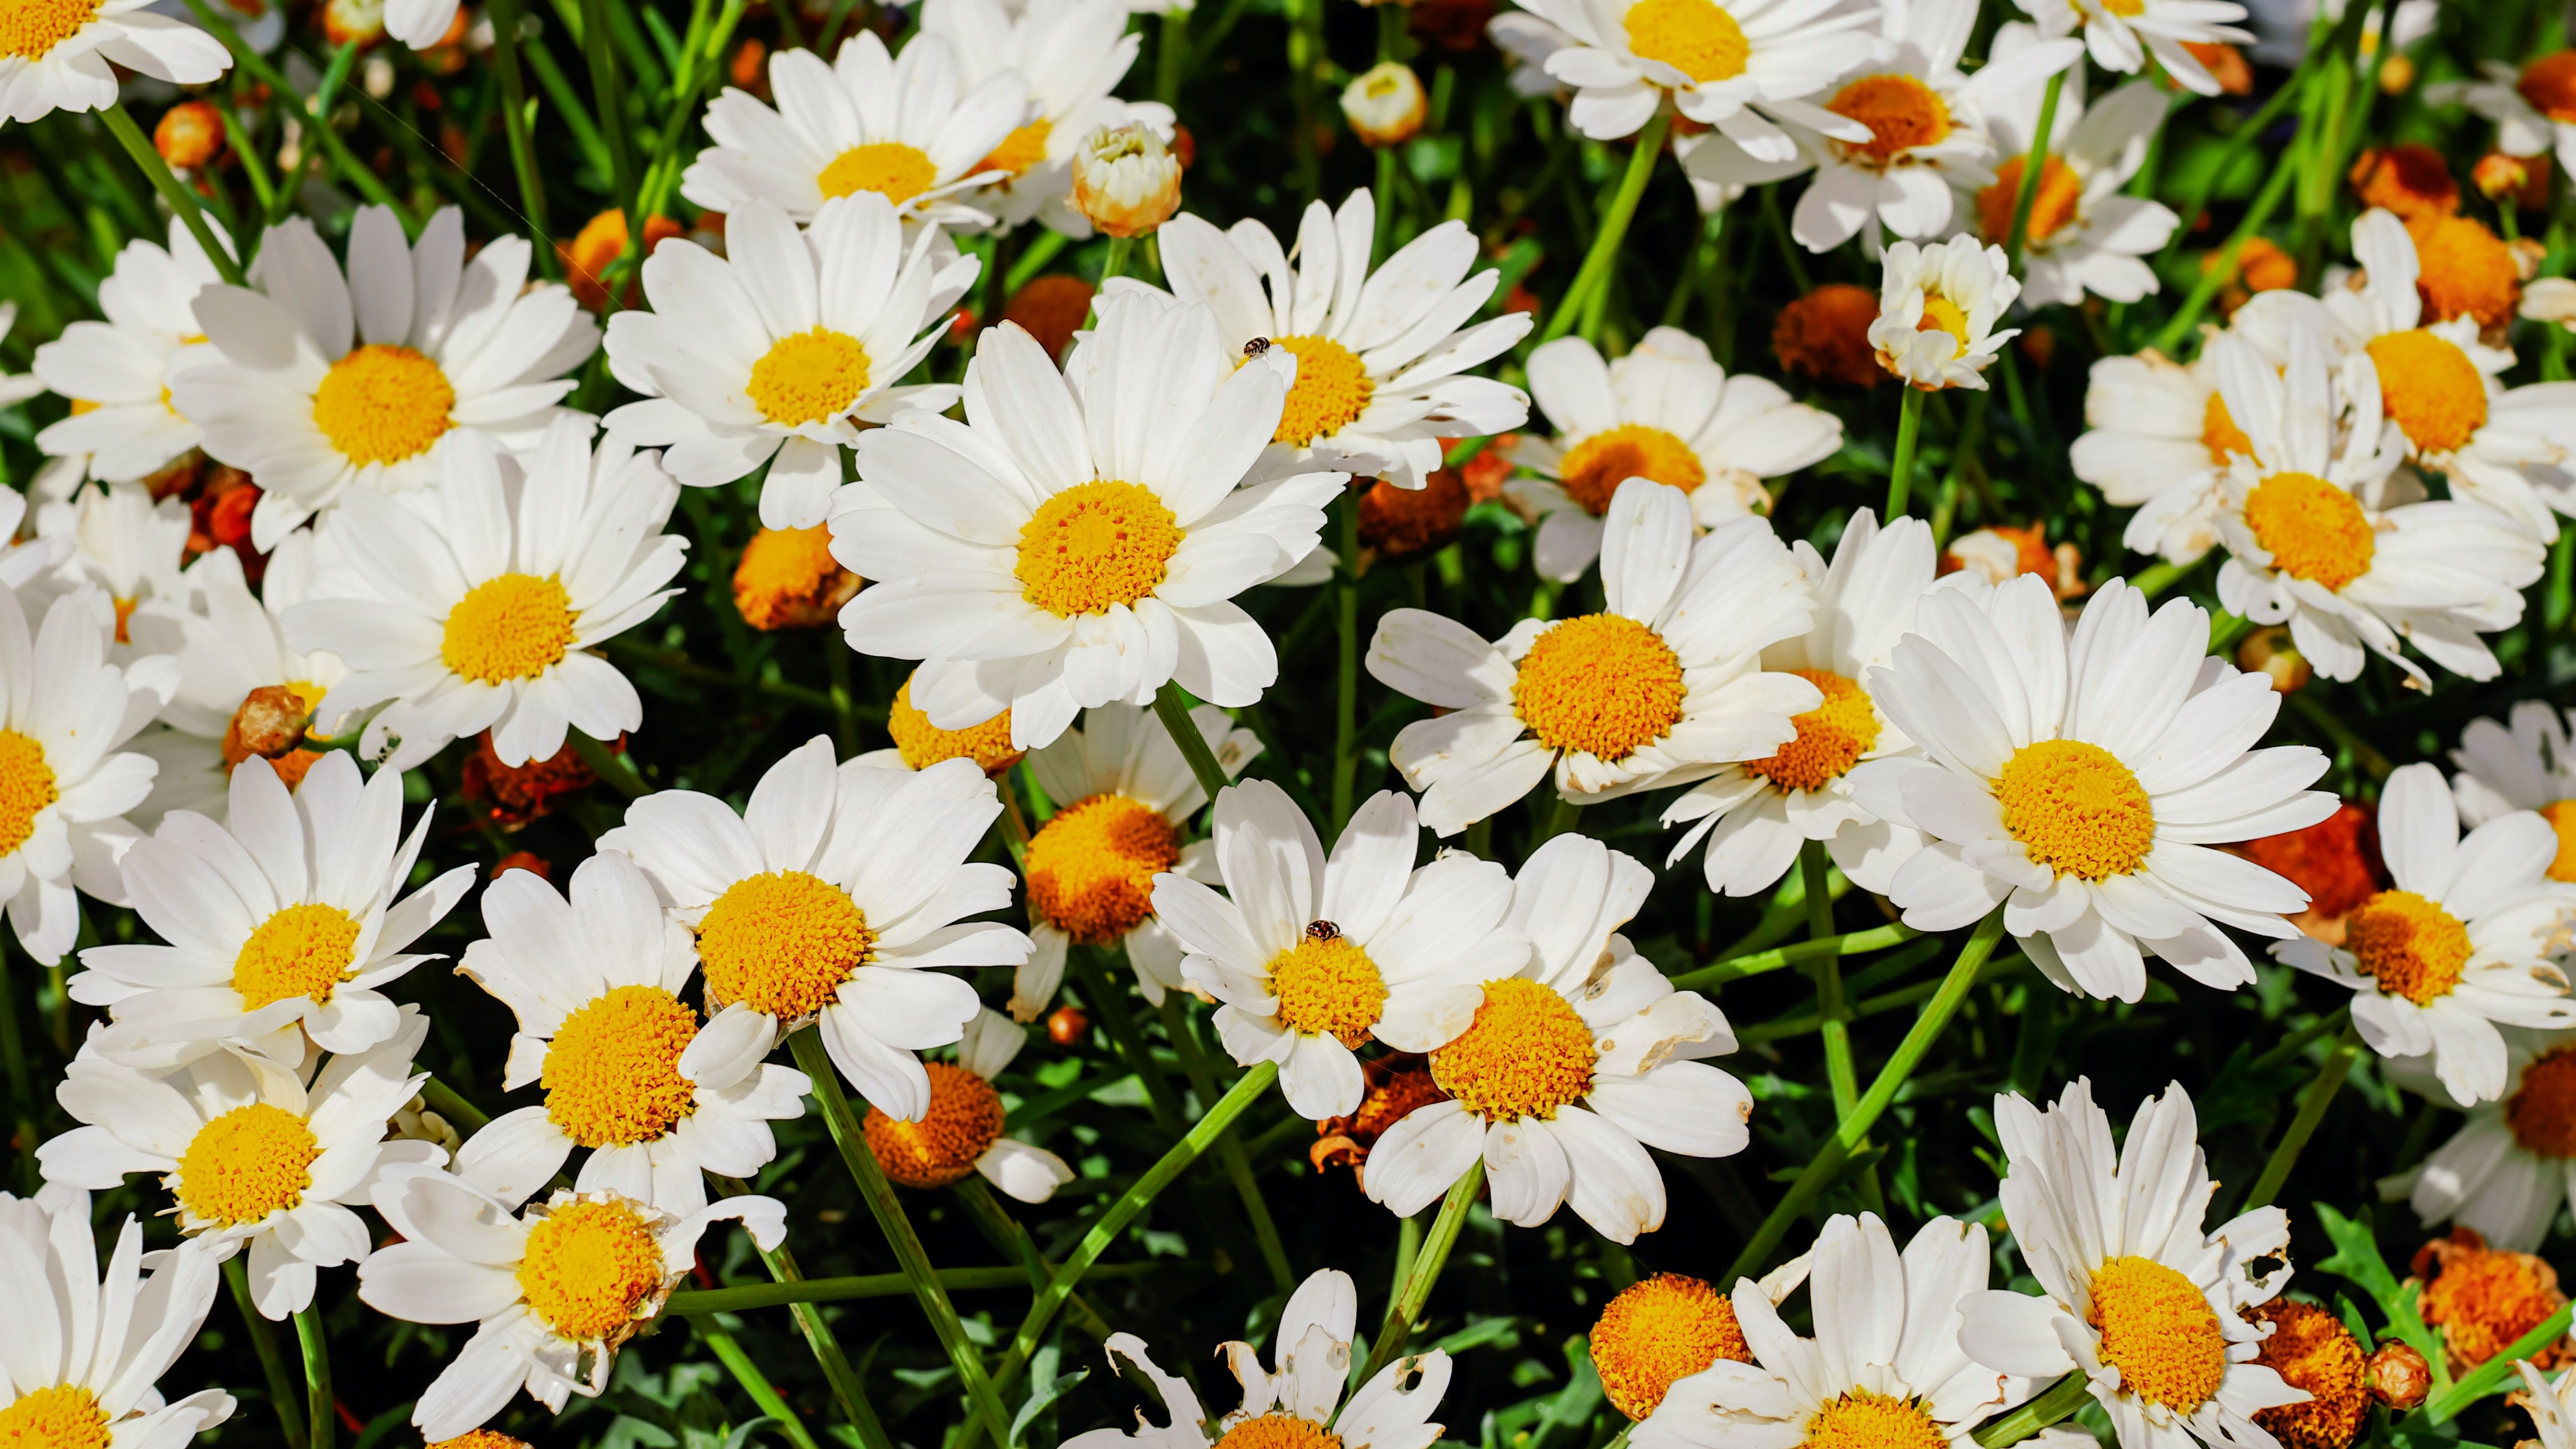 A close up of some white daisies with yellow centers - Daisy